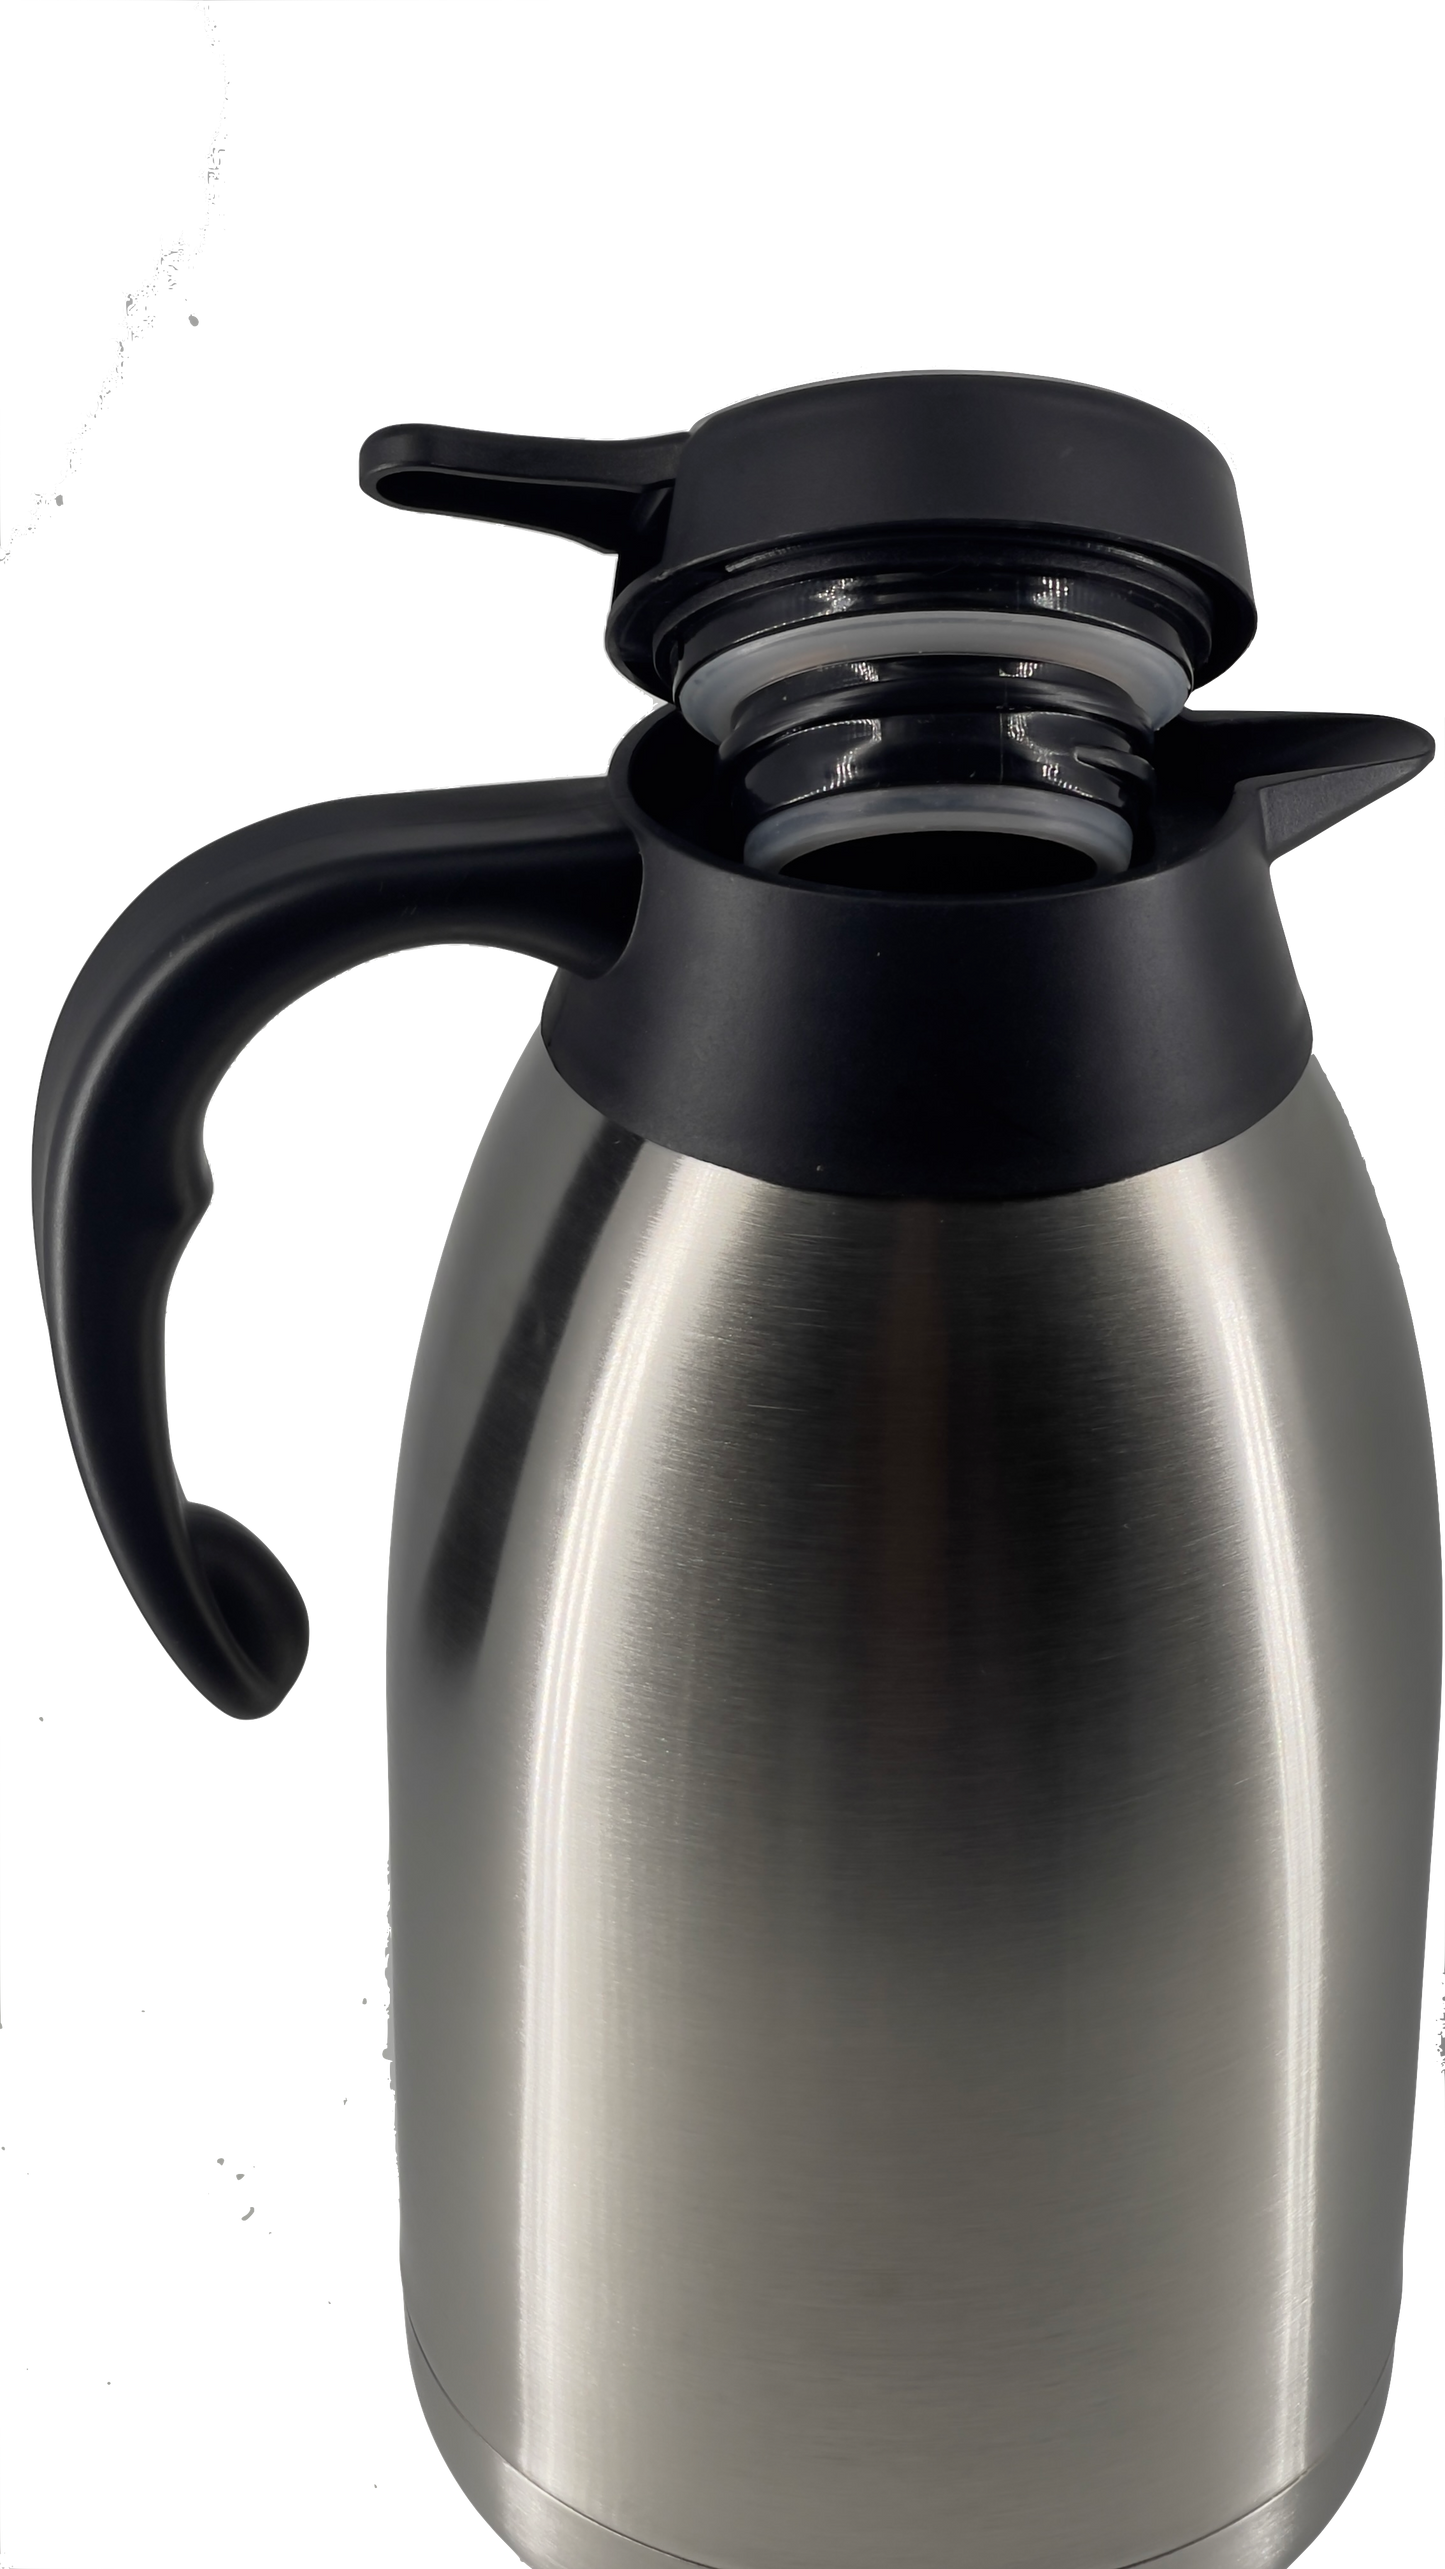 Coffee Carafe Insulated Thermal Server 51 Oz/1.5 Liter - Stainless